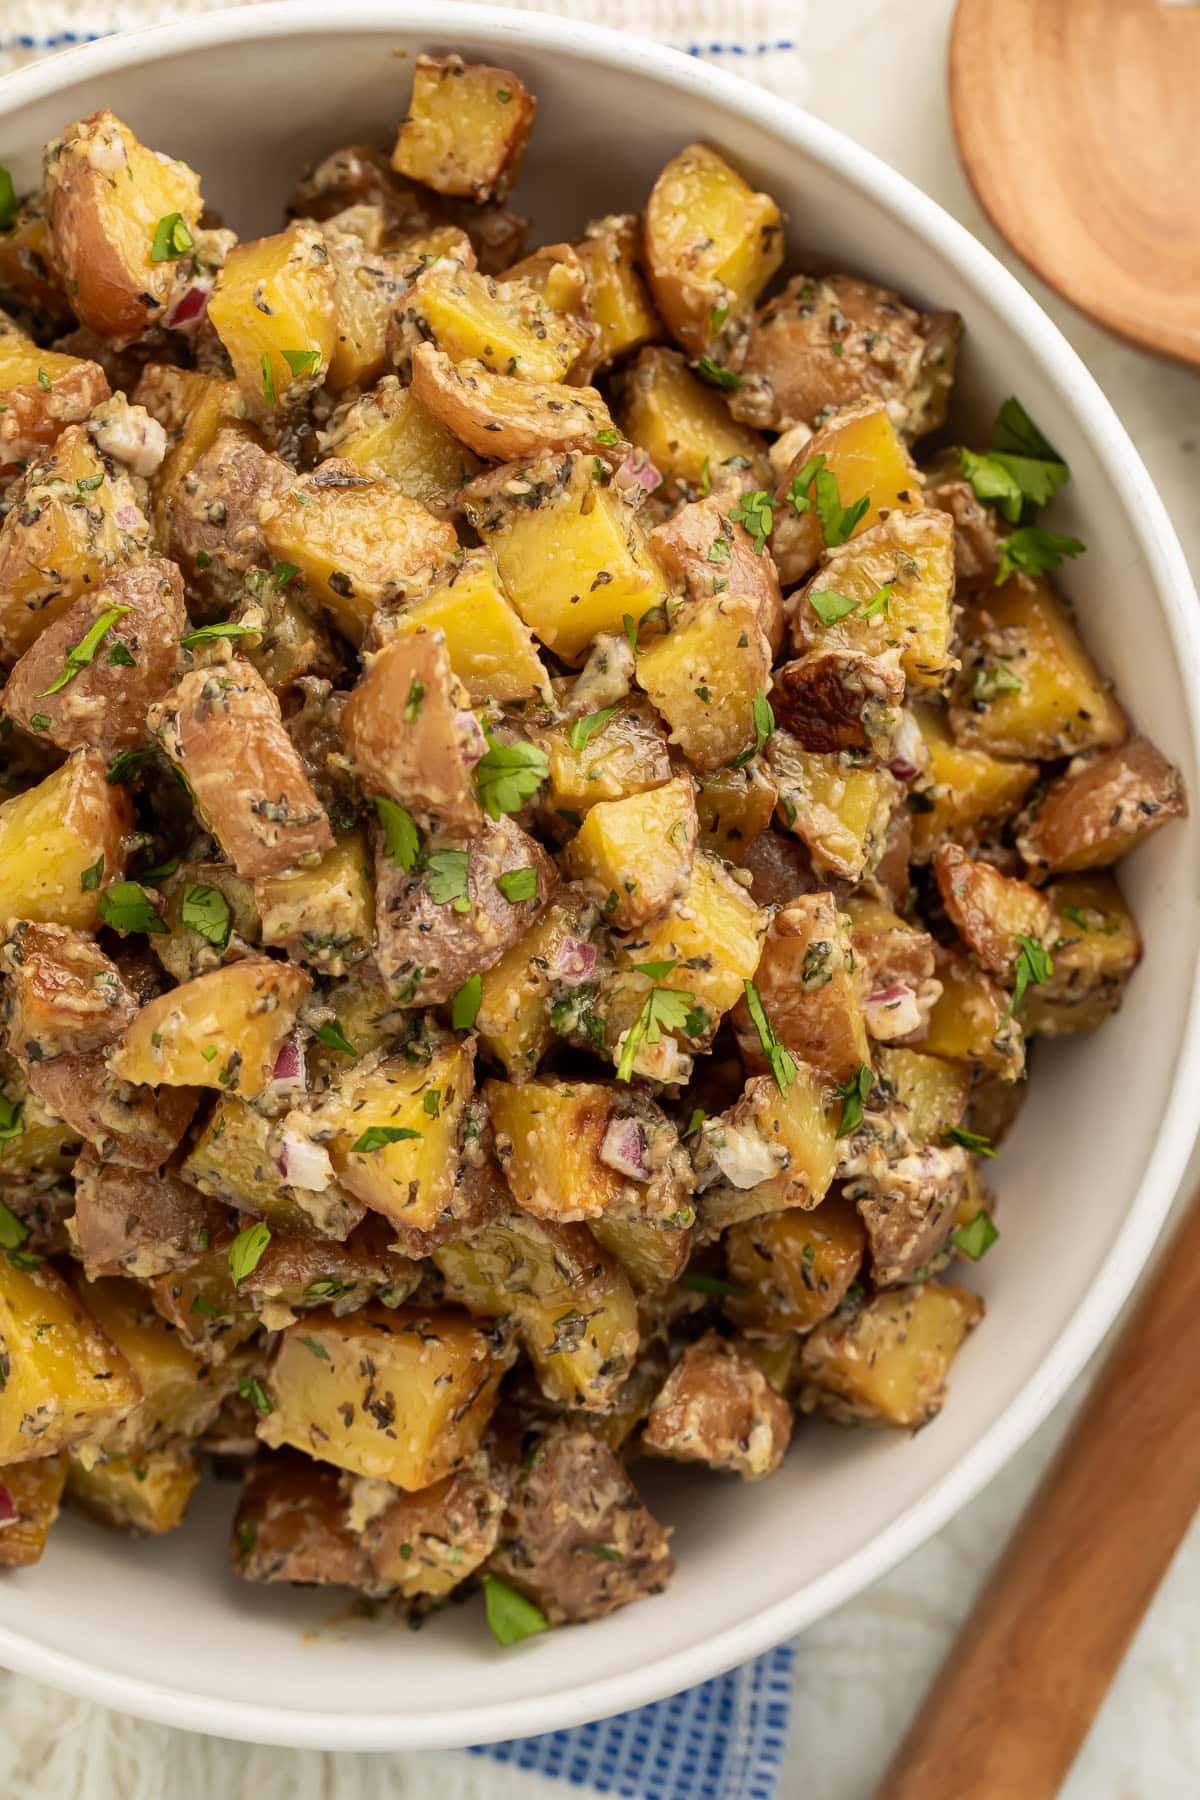 Overhead view of a large bowl of roasted potato salad with diced roasted potatoes, fresh herbs, and red onions.